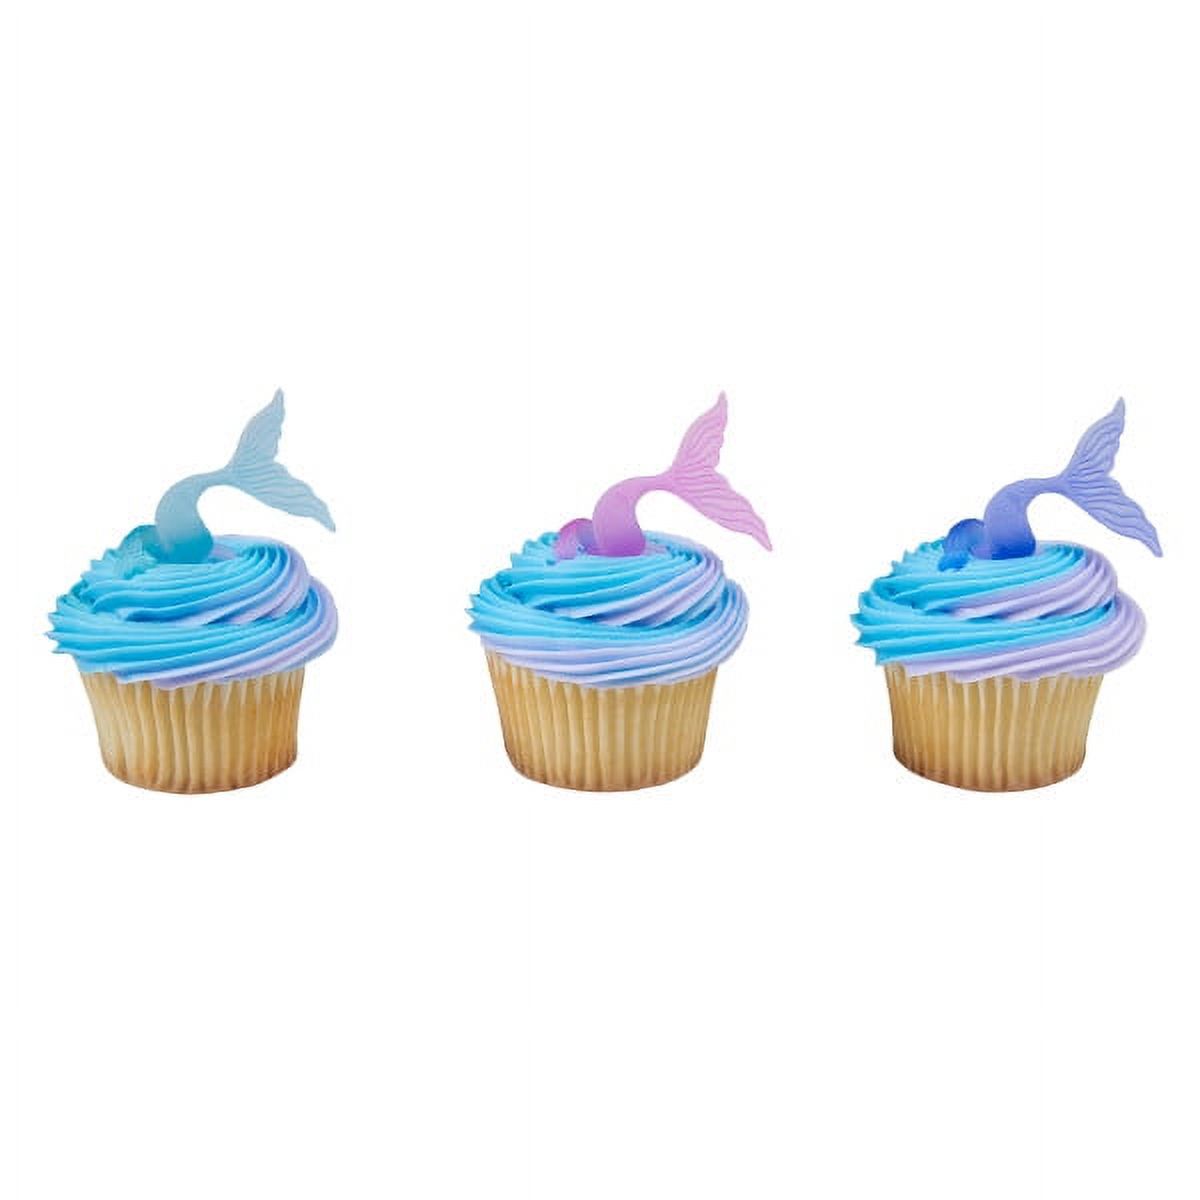 24 Mermaid Tail Wrap Cupcake Cake Ring Birthday Party Favor Toppers - image 1 of 2